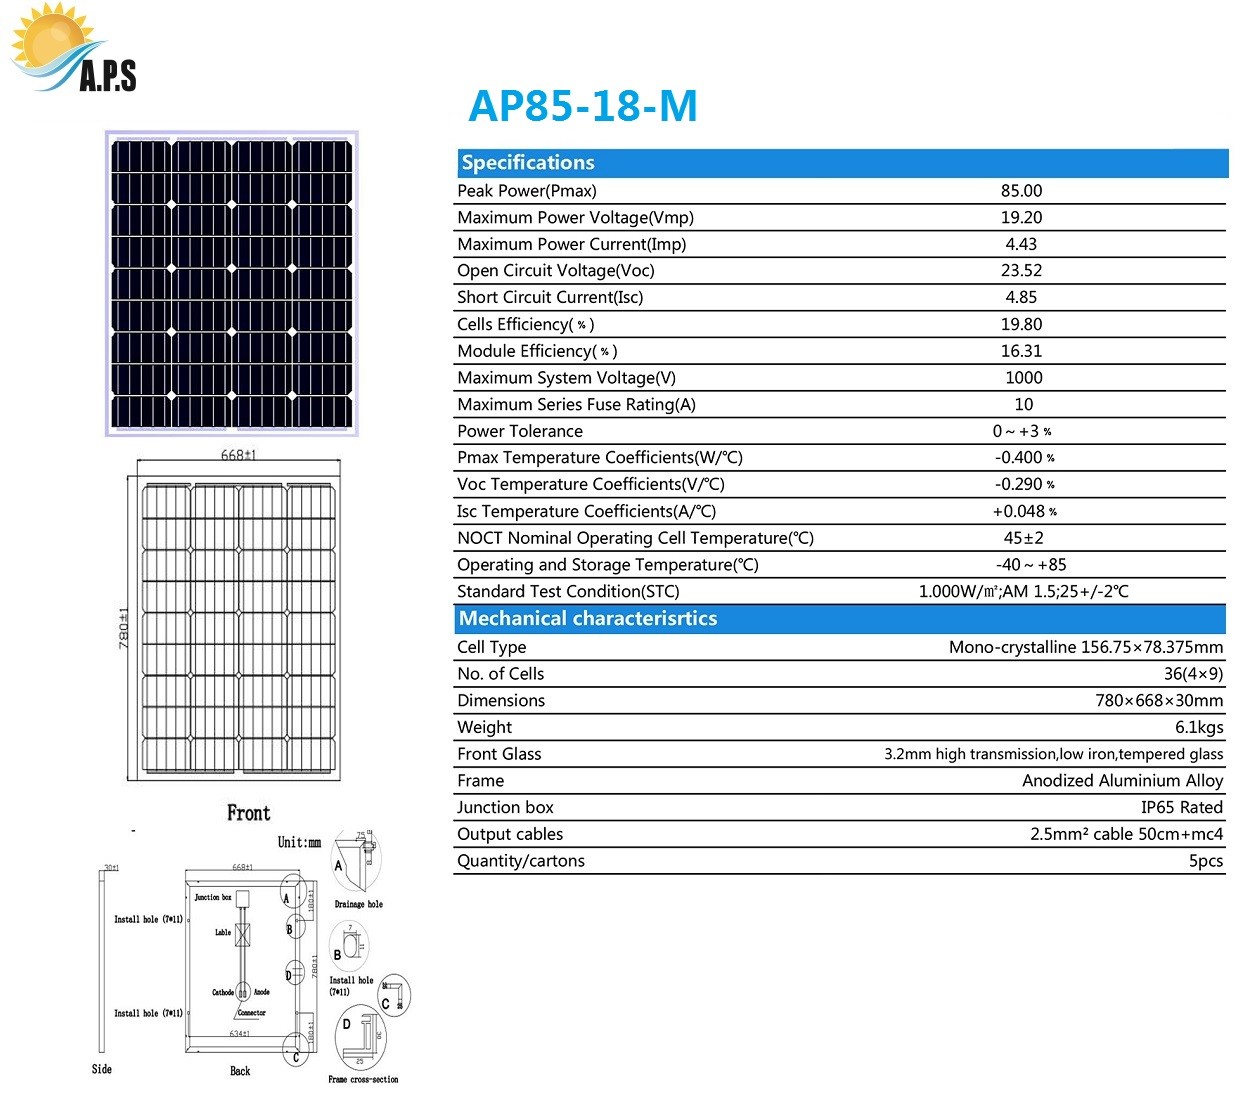 Quality Wholesale Price high quality mono 36cells 85W,90W 18V solar panel system for farm or home for sale